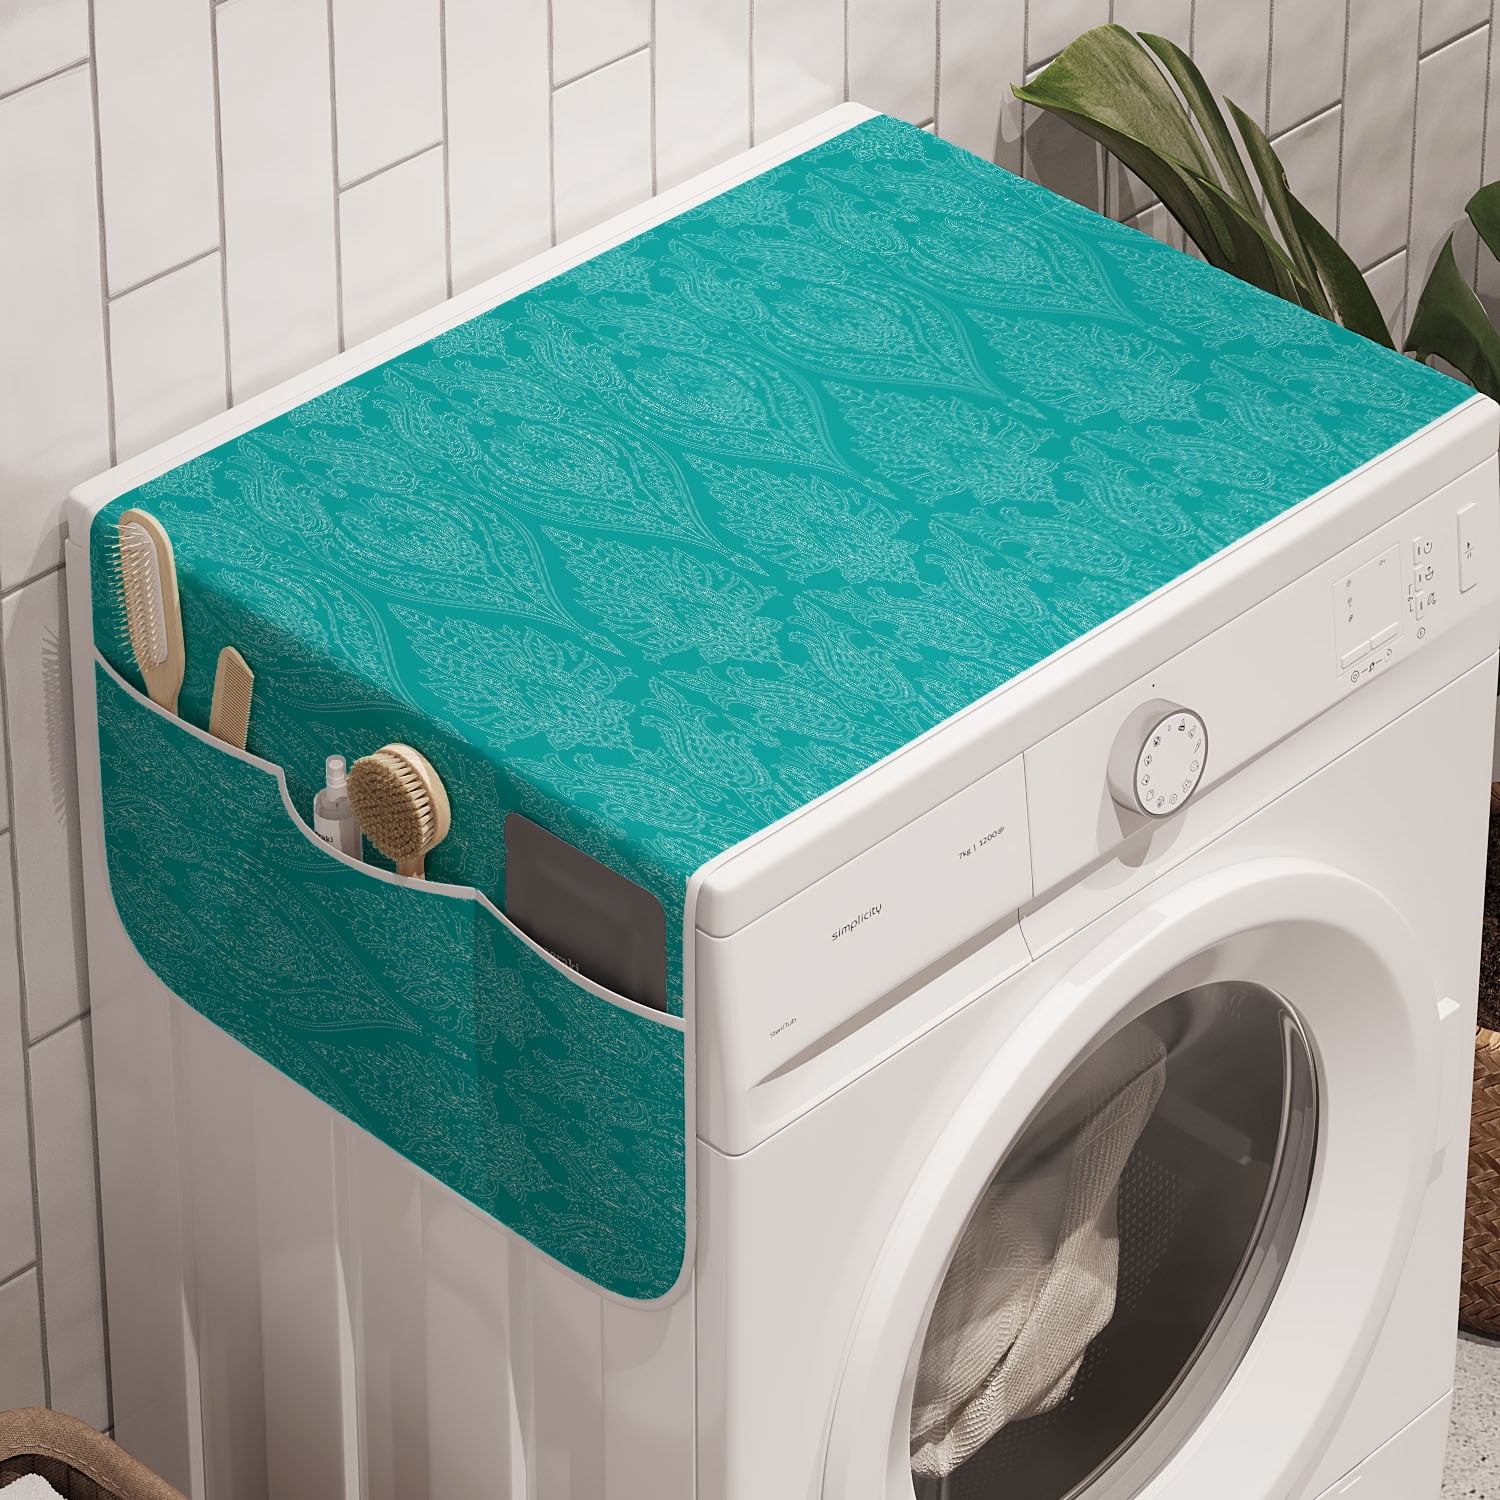 Washer and Dryer Covers for the Top, Magnet Non-slip Washing Machine Cover,  Washer Cover , Washer Top Protector for Laundry Kitchen Home,Style:Style